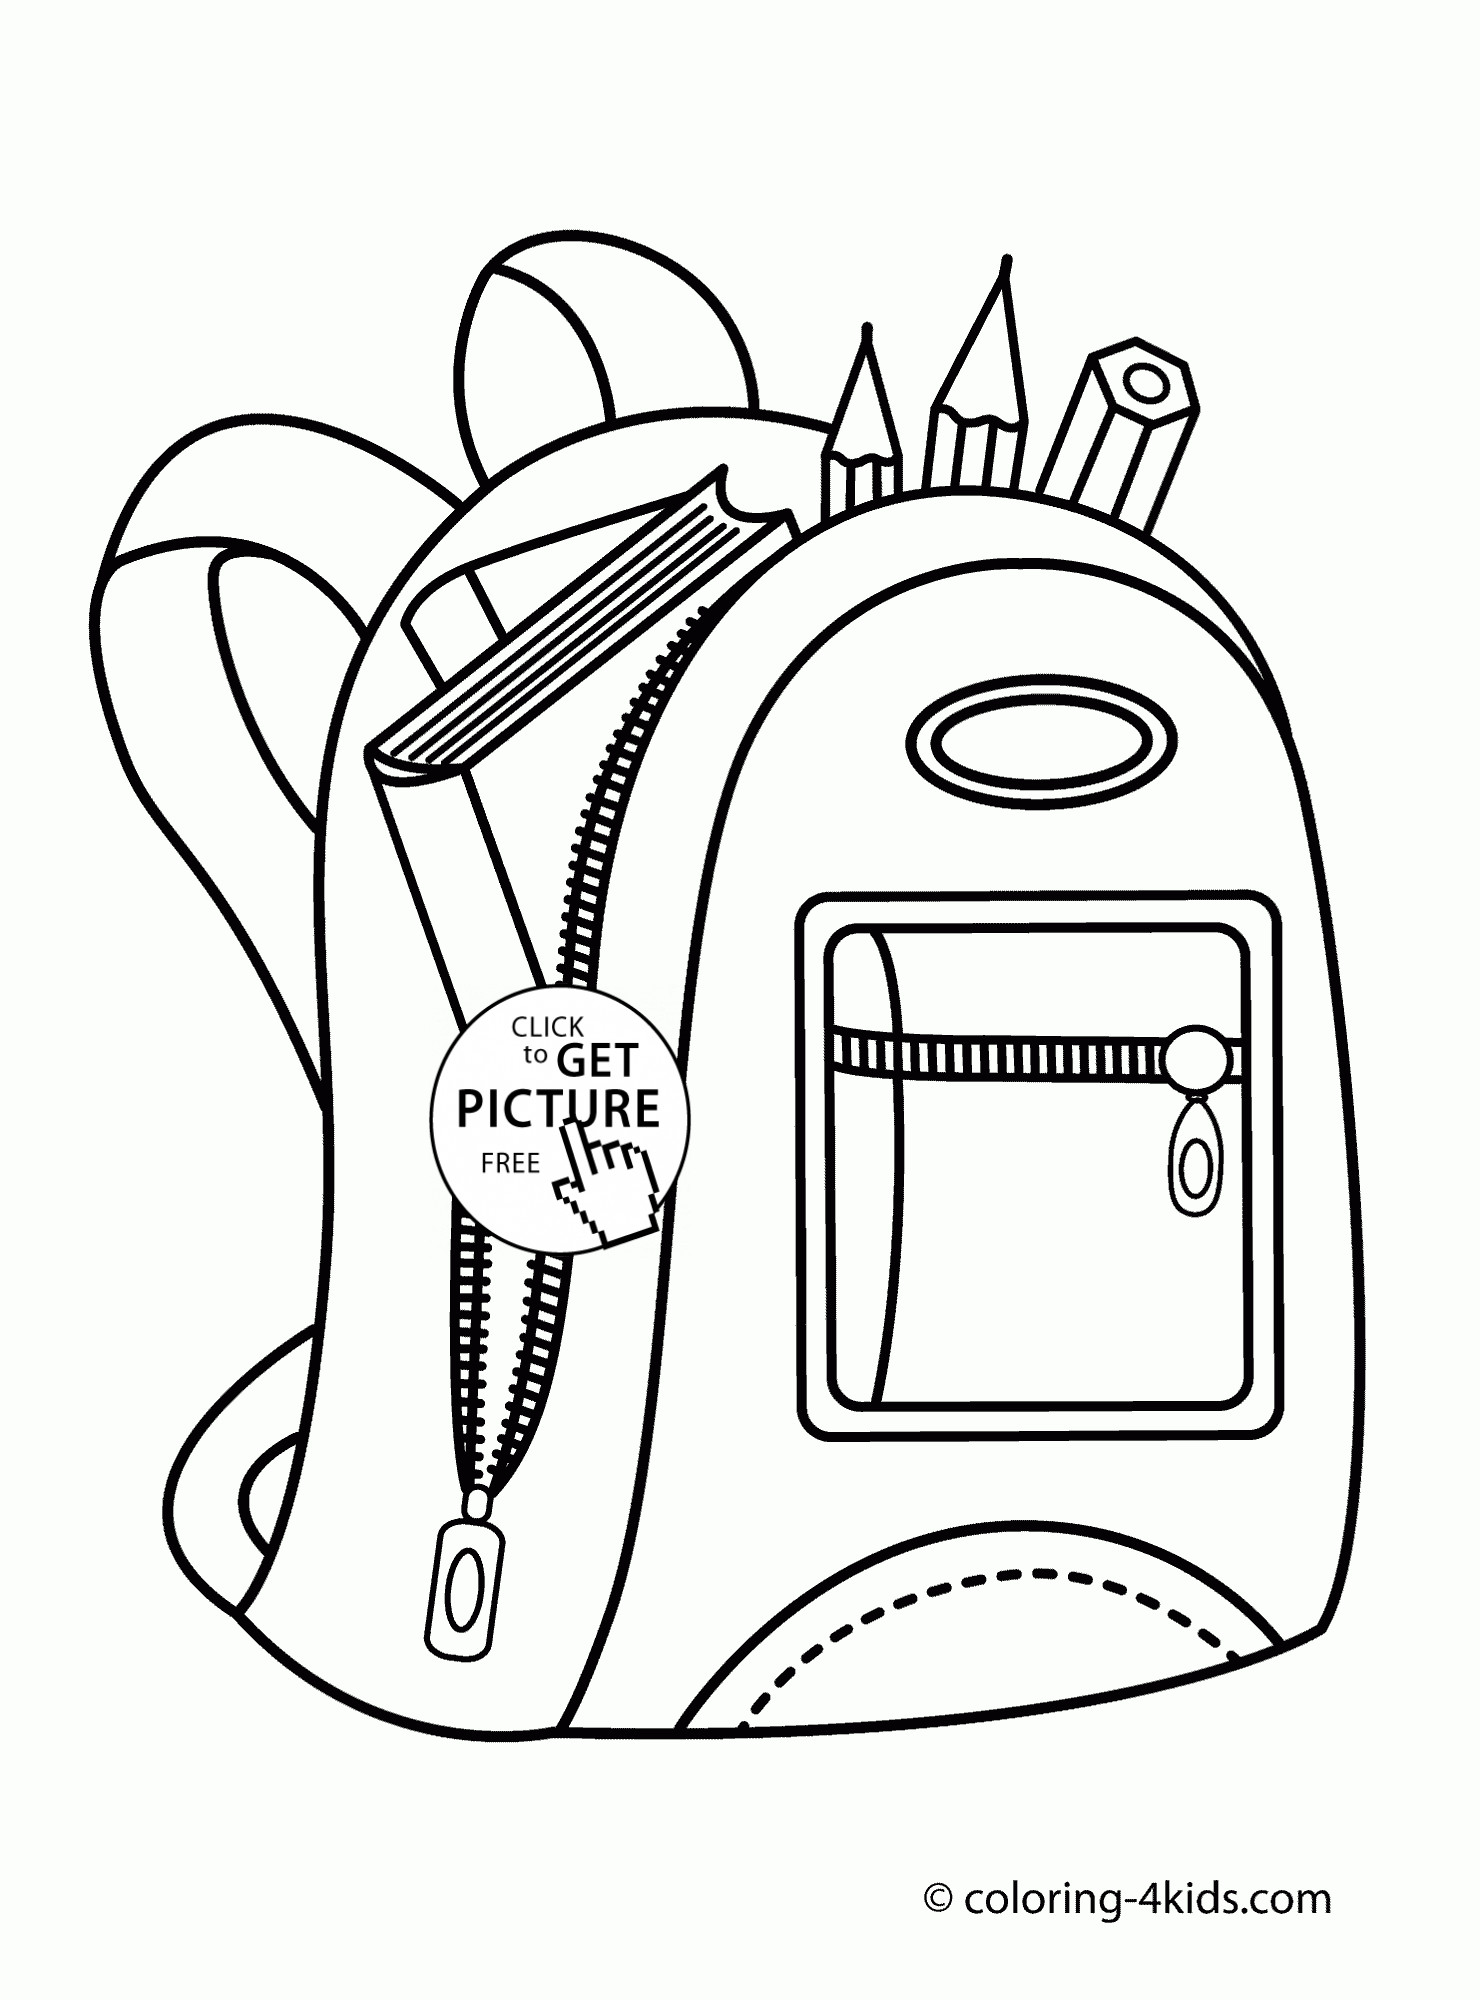 Backpack with School Supplies coloring page for kids back